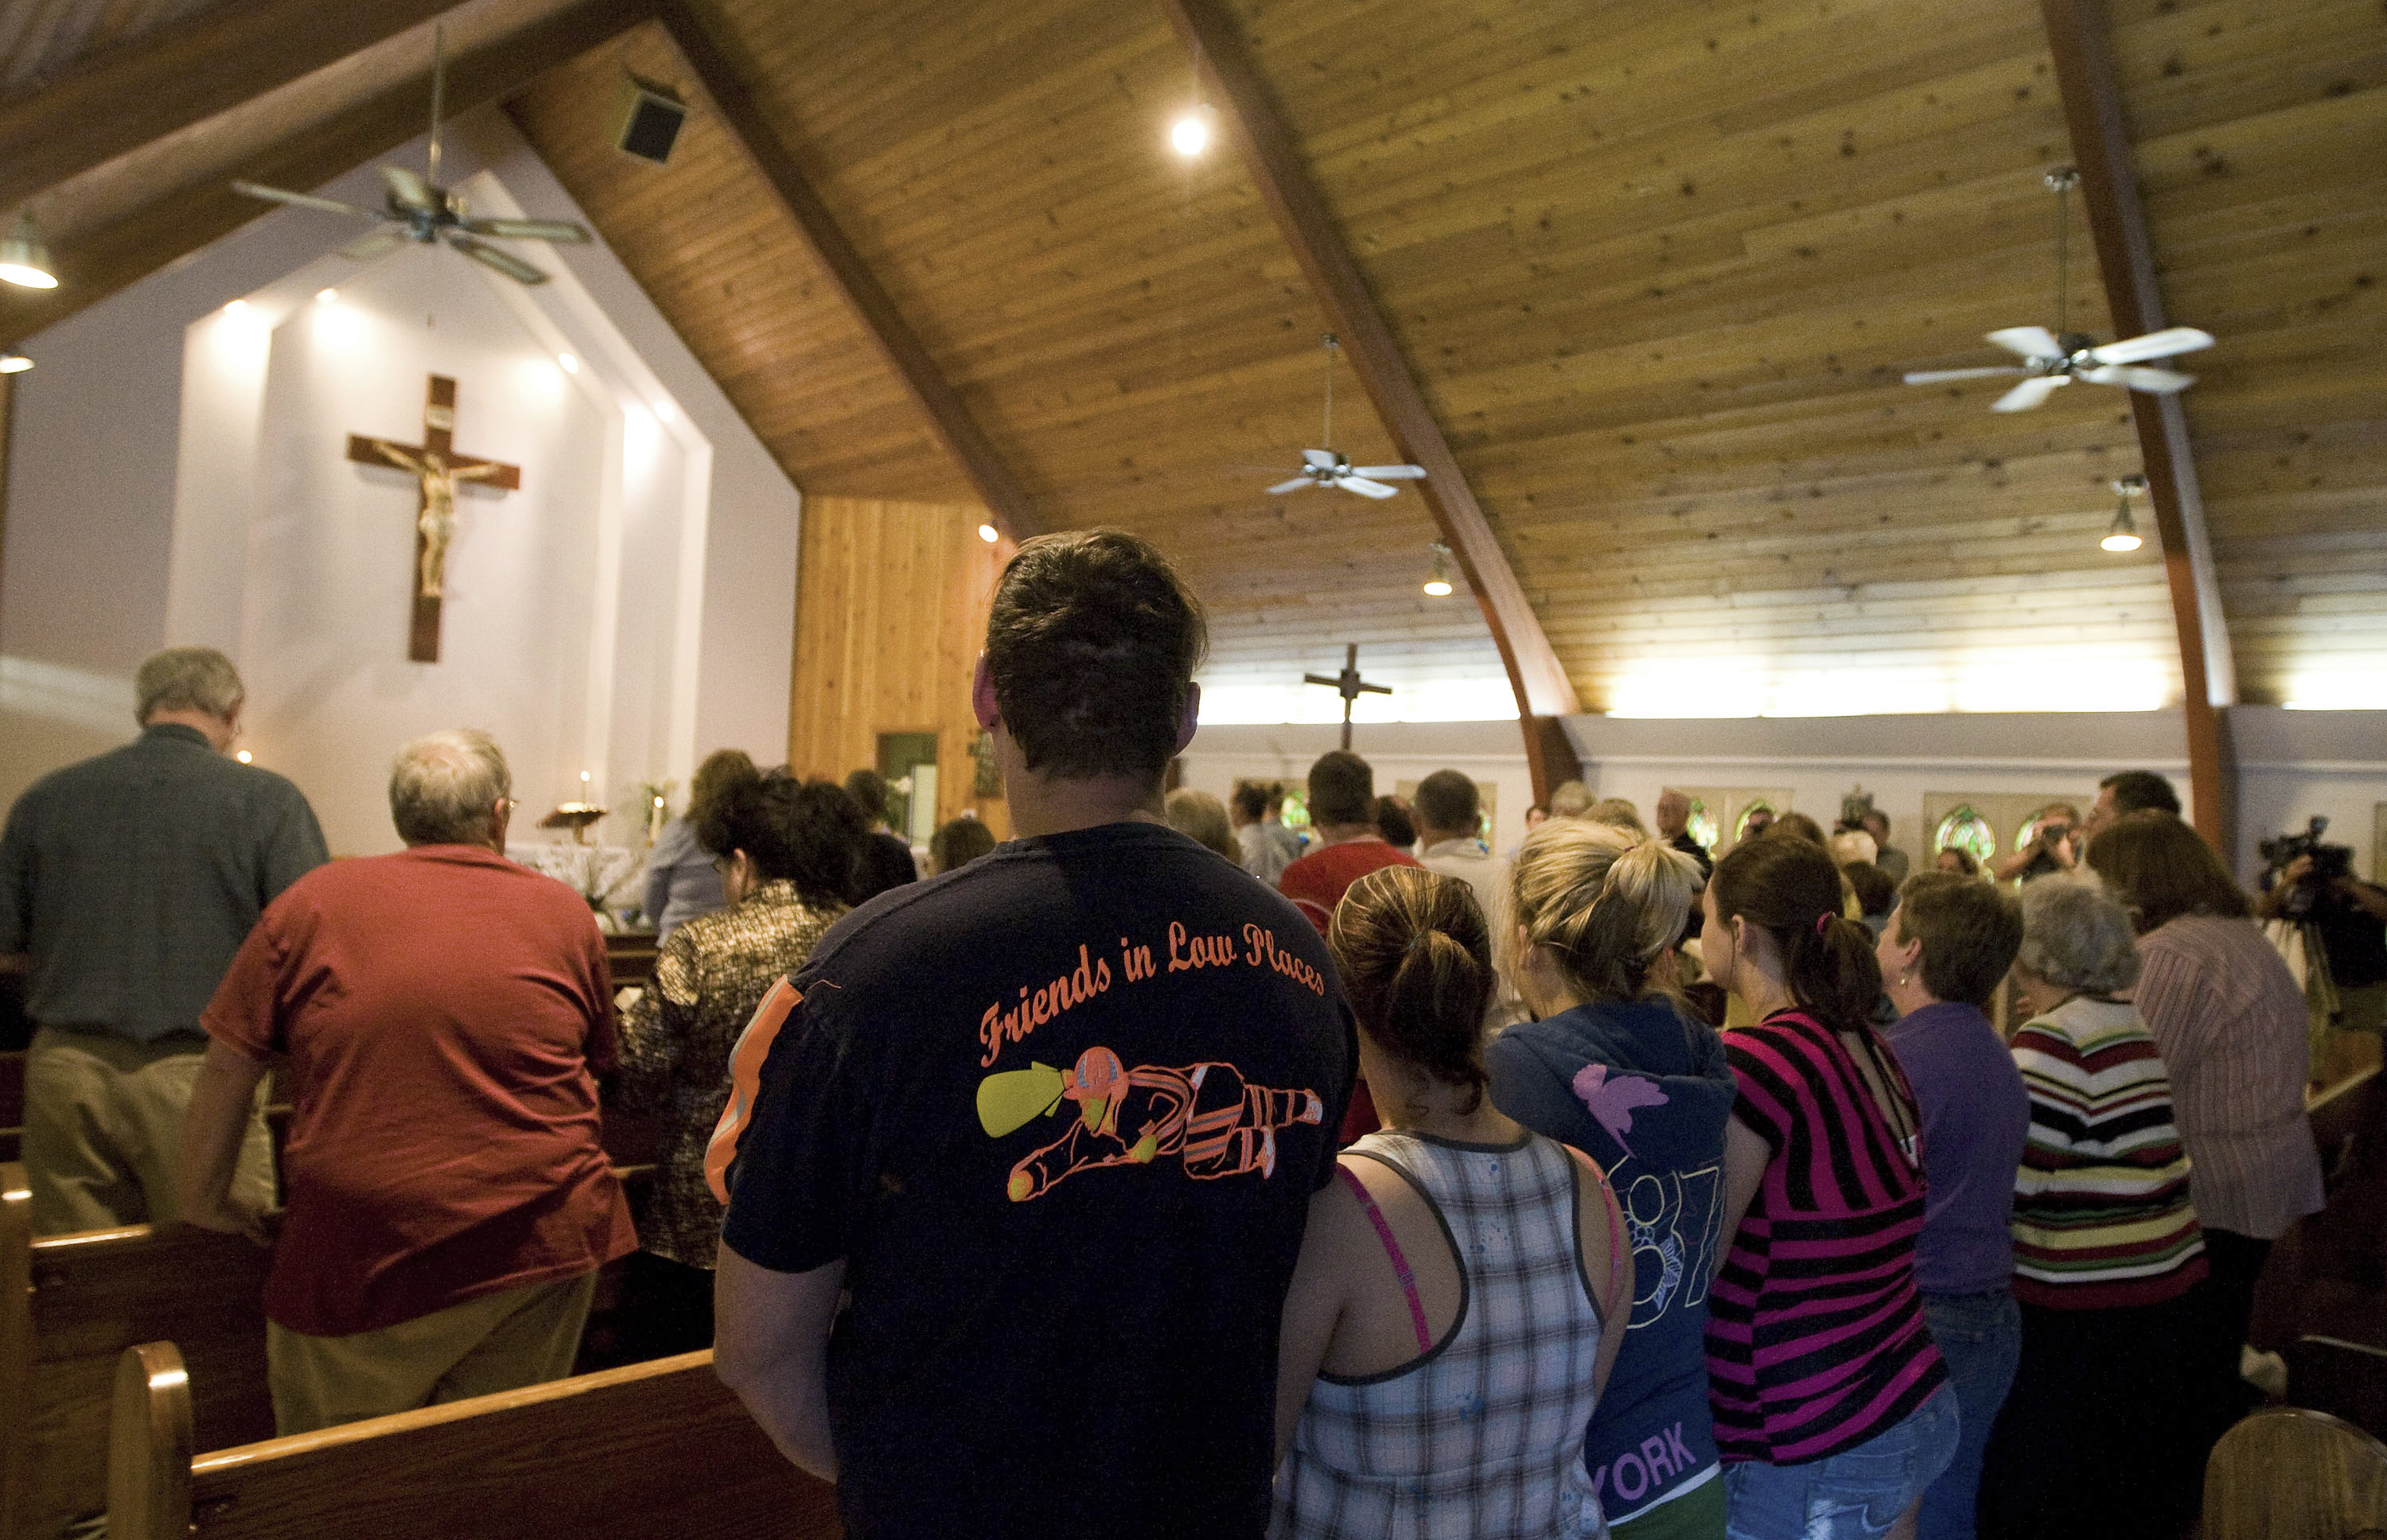 Parishioners pray during a mass at St. Joseph's Catholic Church in Whitesville, West Virginia on April 6, 2010. (Photo: Reuters/Chris Keane)